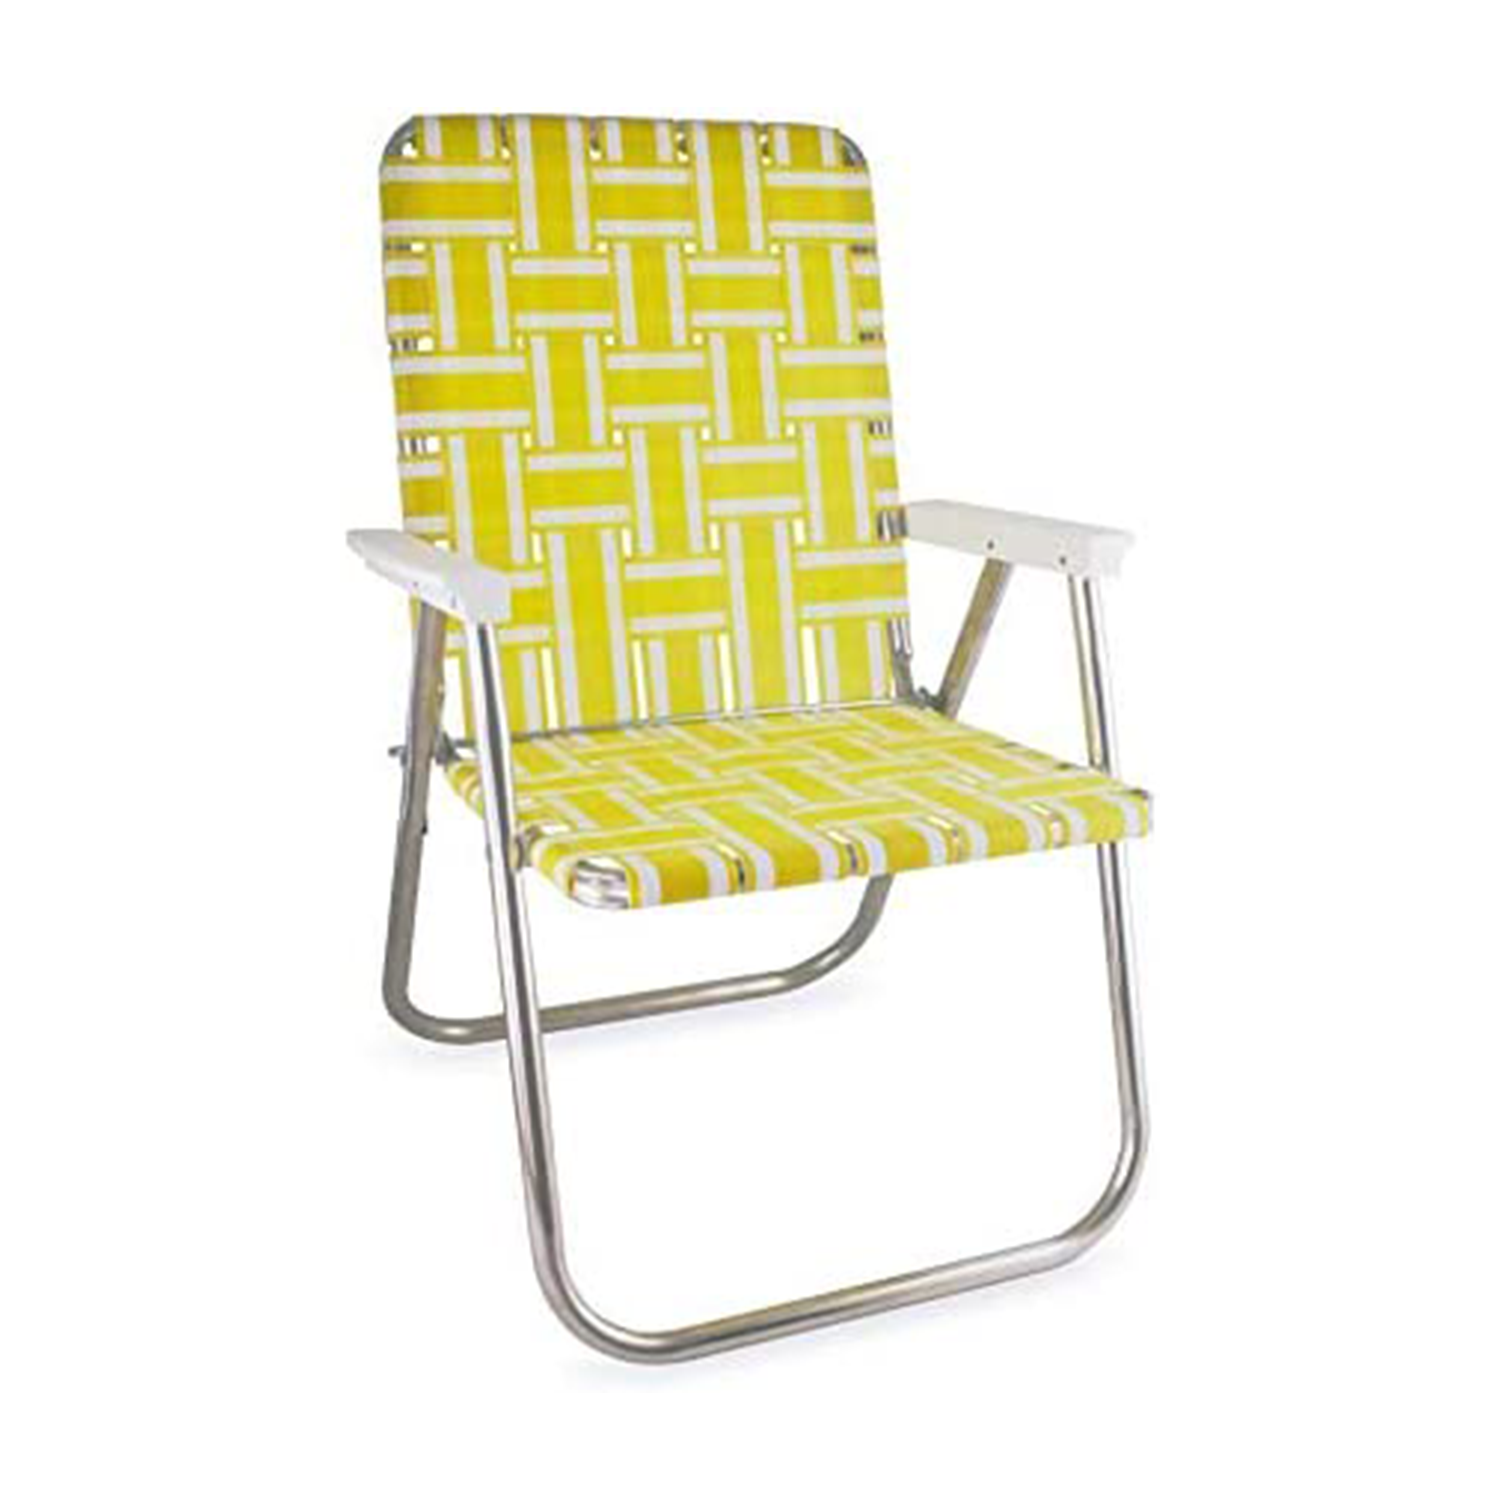 Lawn Chair USA Classic in Yellow and White